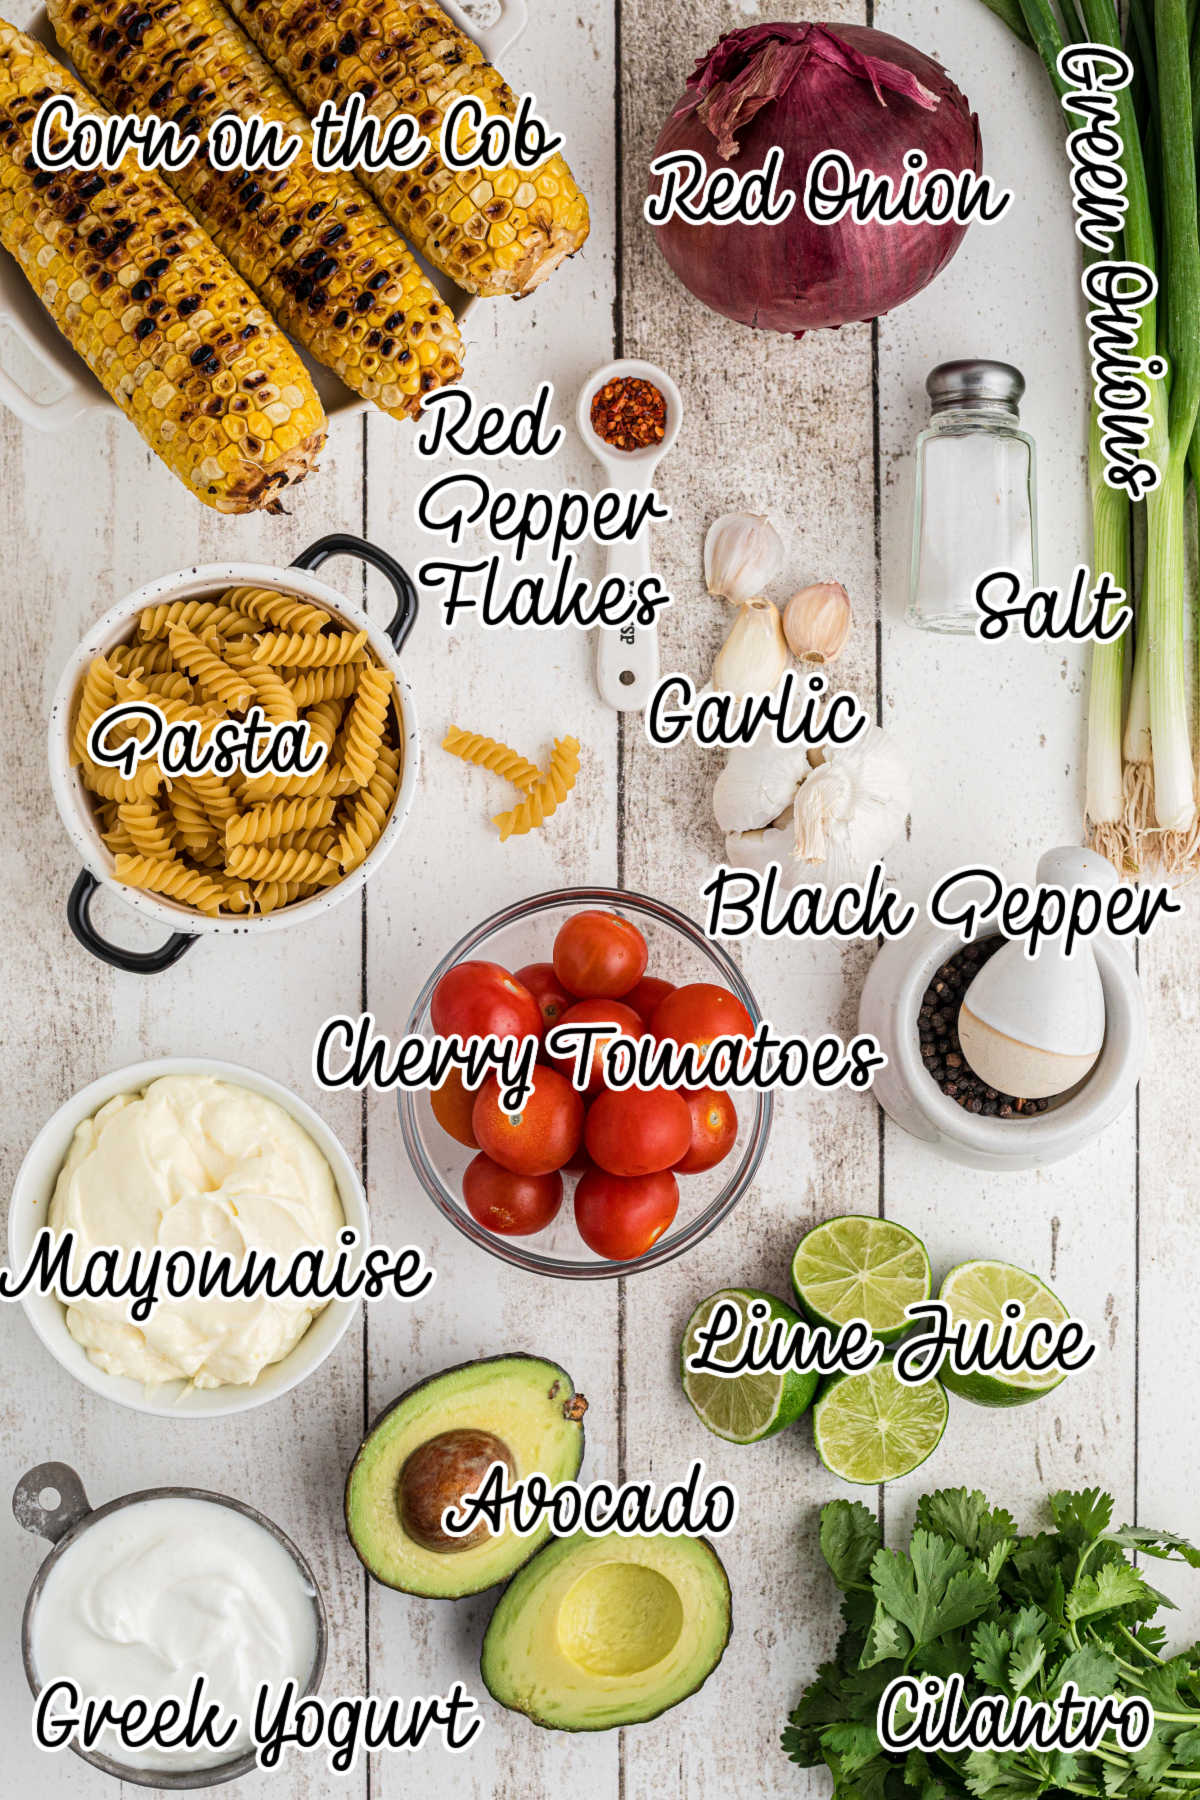 Overhead shot of ingredients laid out, showing what is needed to make a cilantro lime pasta salad recipe, with text overlay.